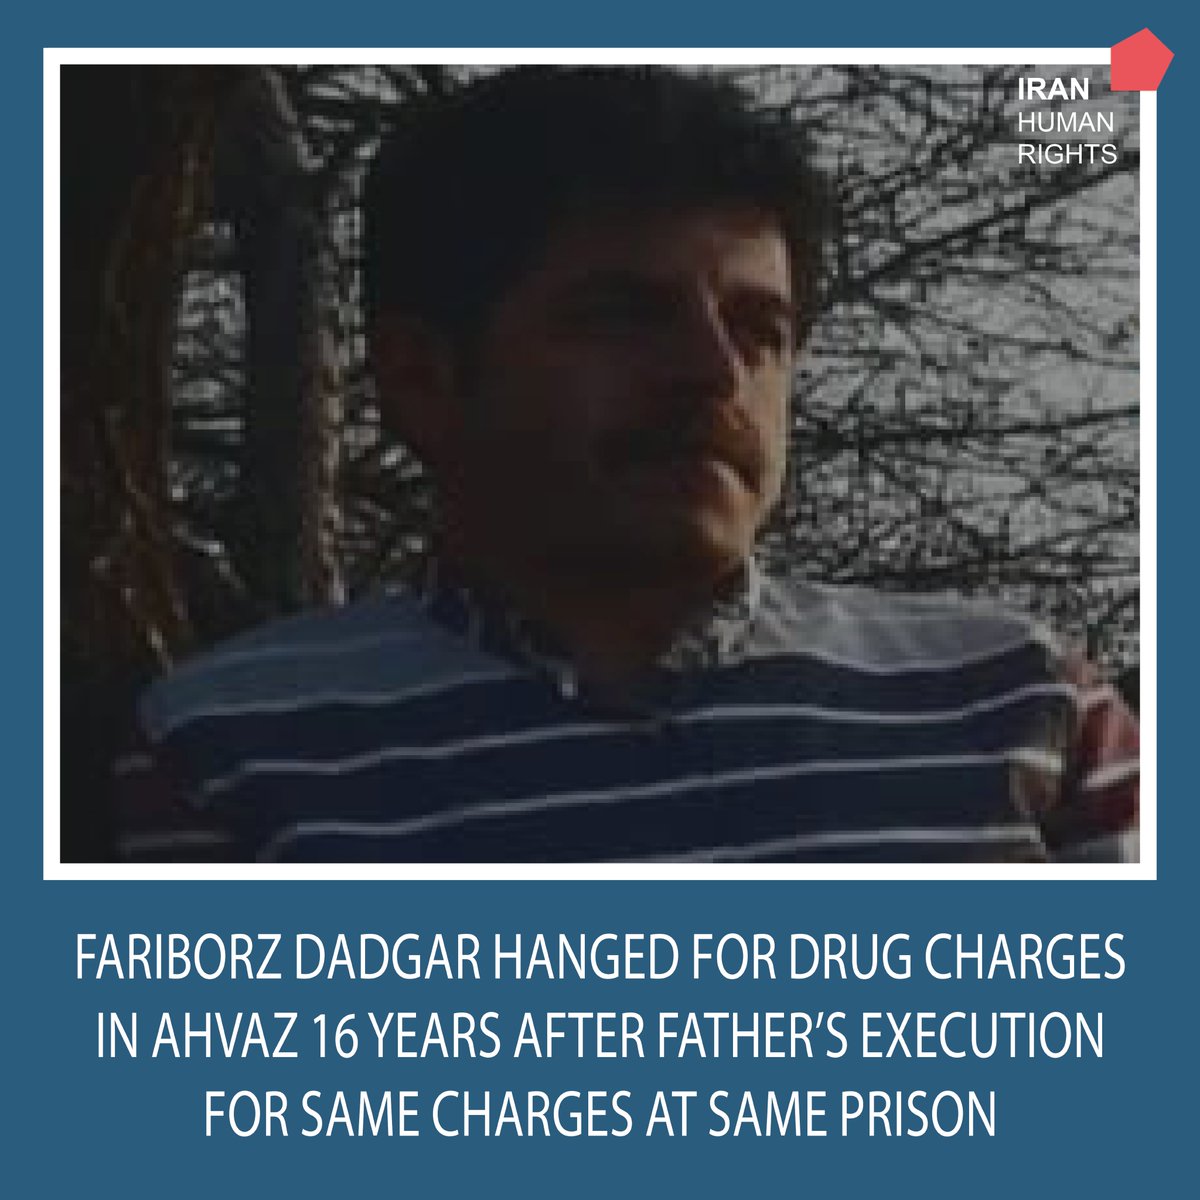 #Iran: 36-year-old Fariborz Dadgar was executed for drug-related charges in Ahvaz Sepidar Prison on 18th April. His father was executed for the same charges at the same prison 16 years prior. 

This is not the first case of inter-generational drug execution. In the last case,